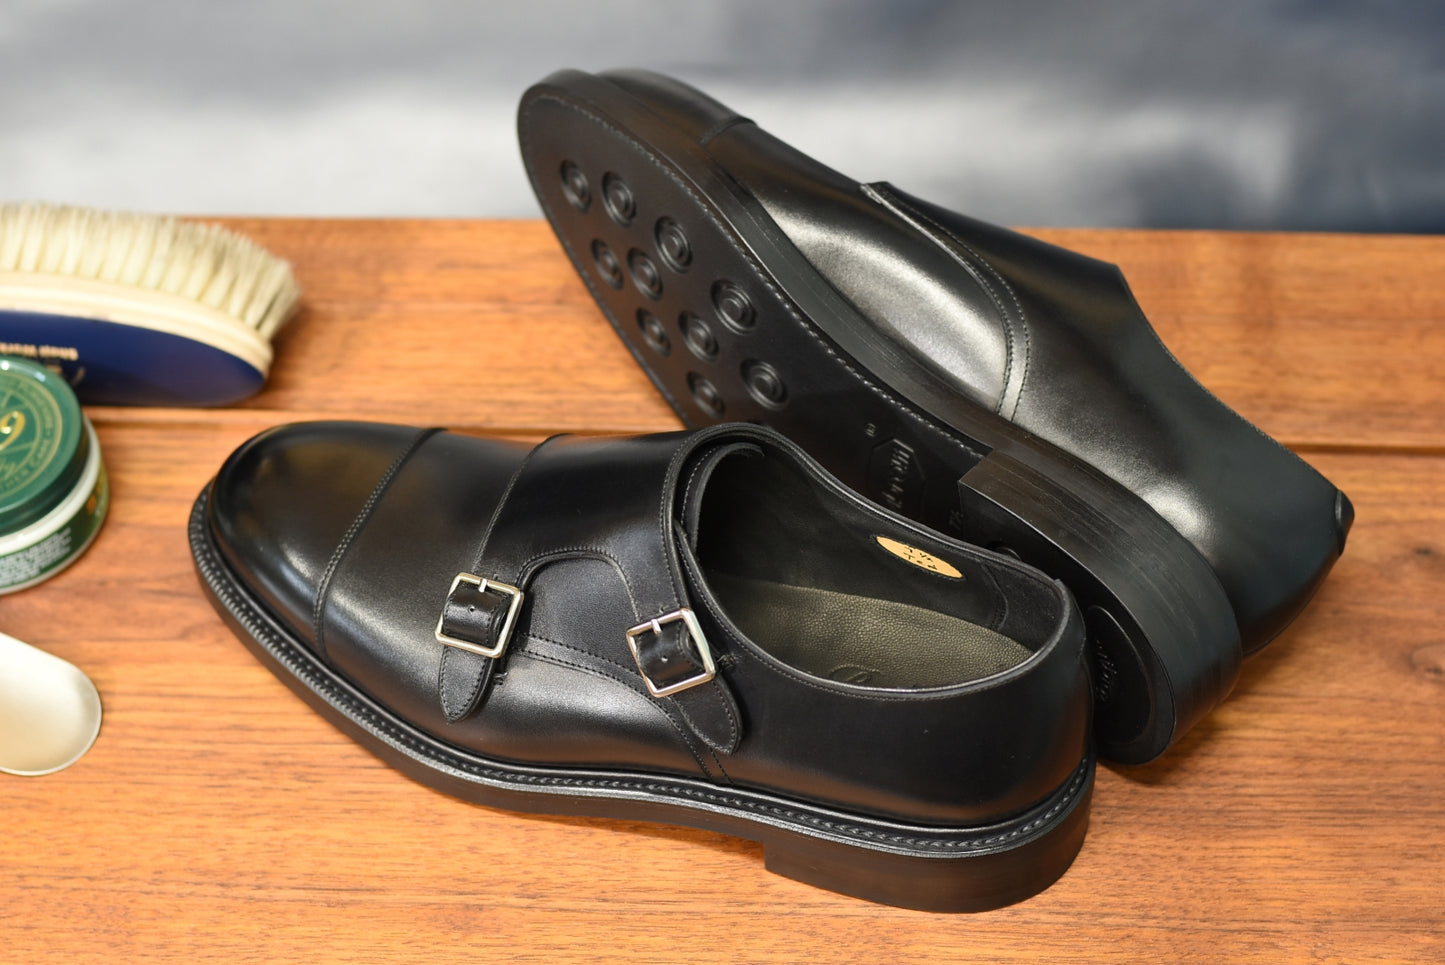 “Ted” Double Monk Strap, Black Dress Shoes, Weinheimer Box calf, Goodyear welted, US size 5 1/2 ~ 10